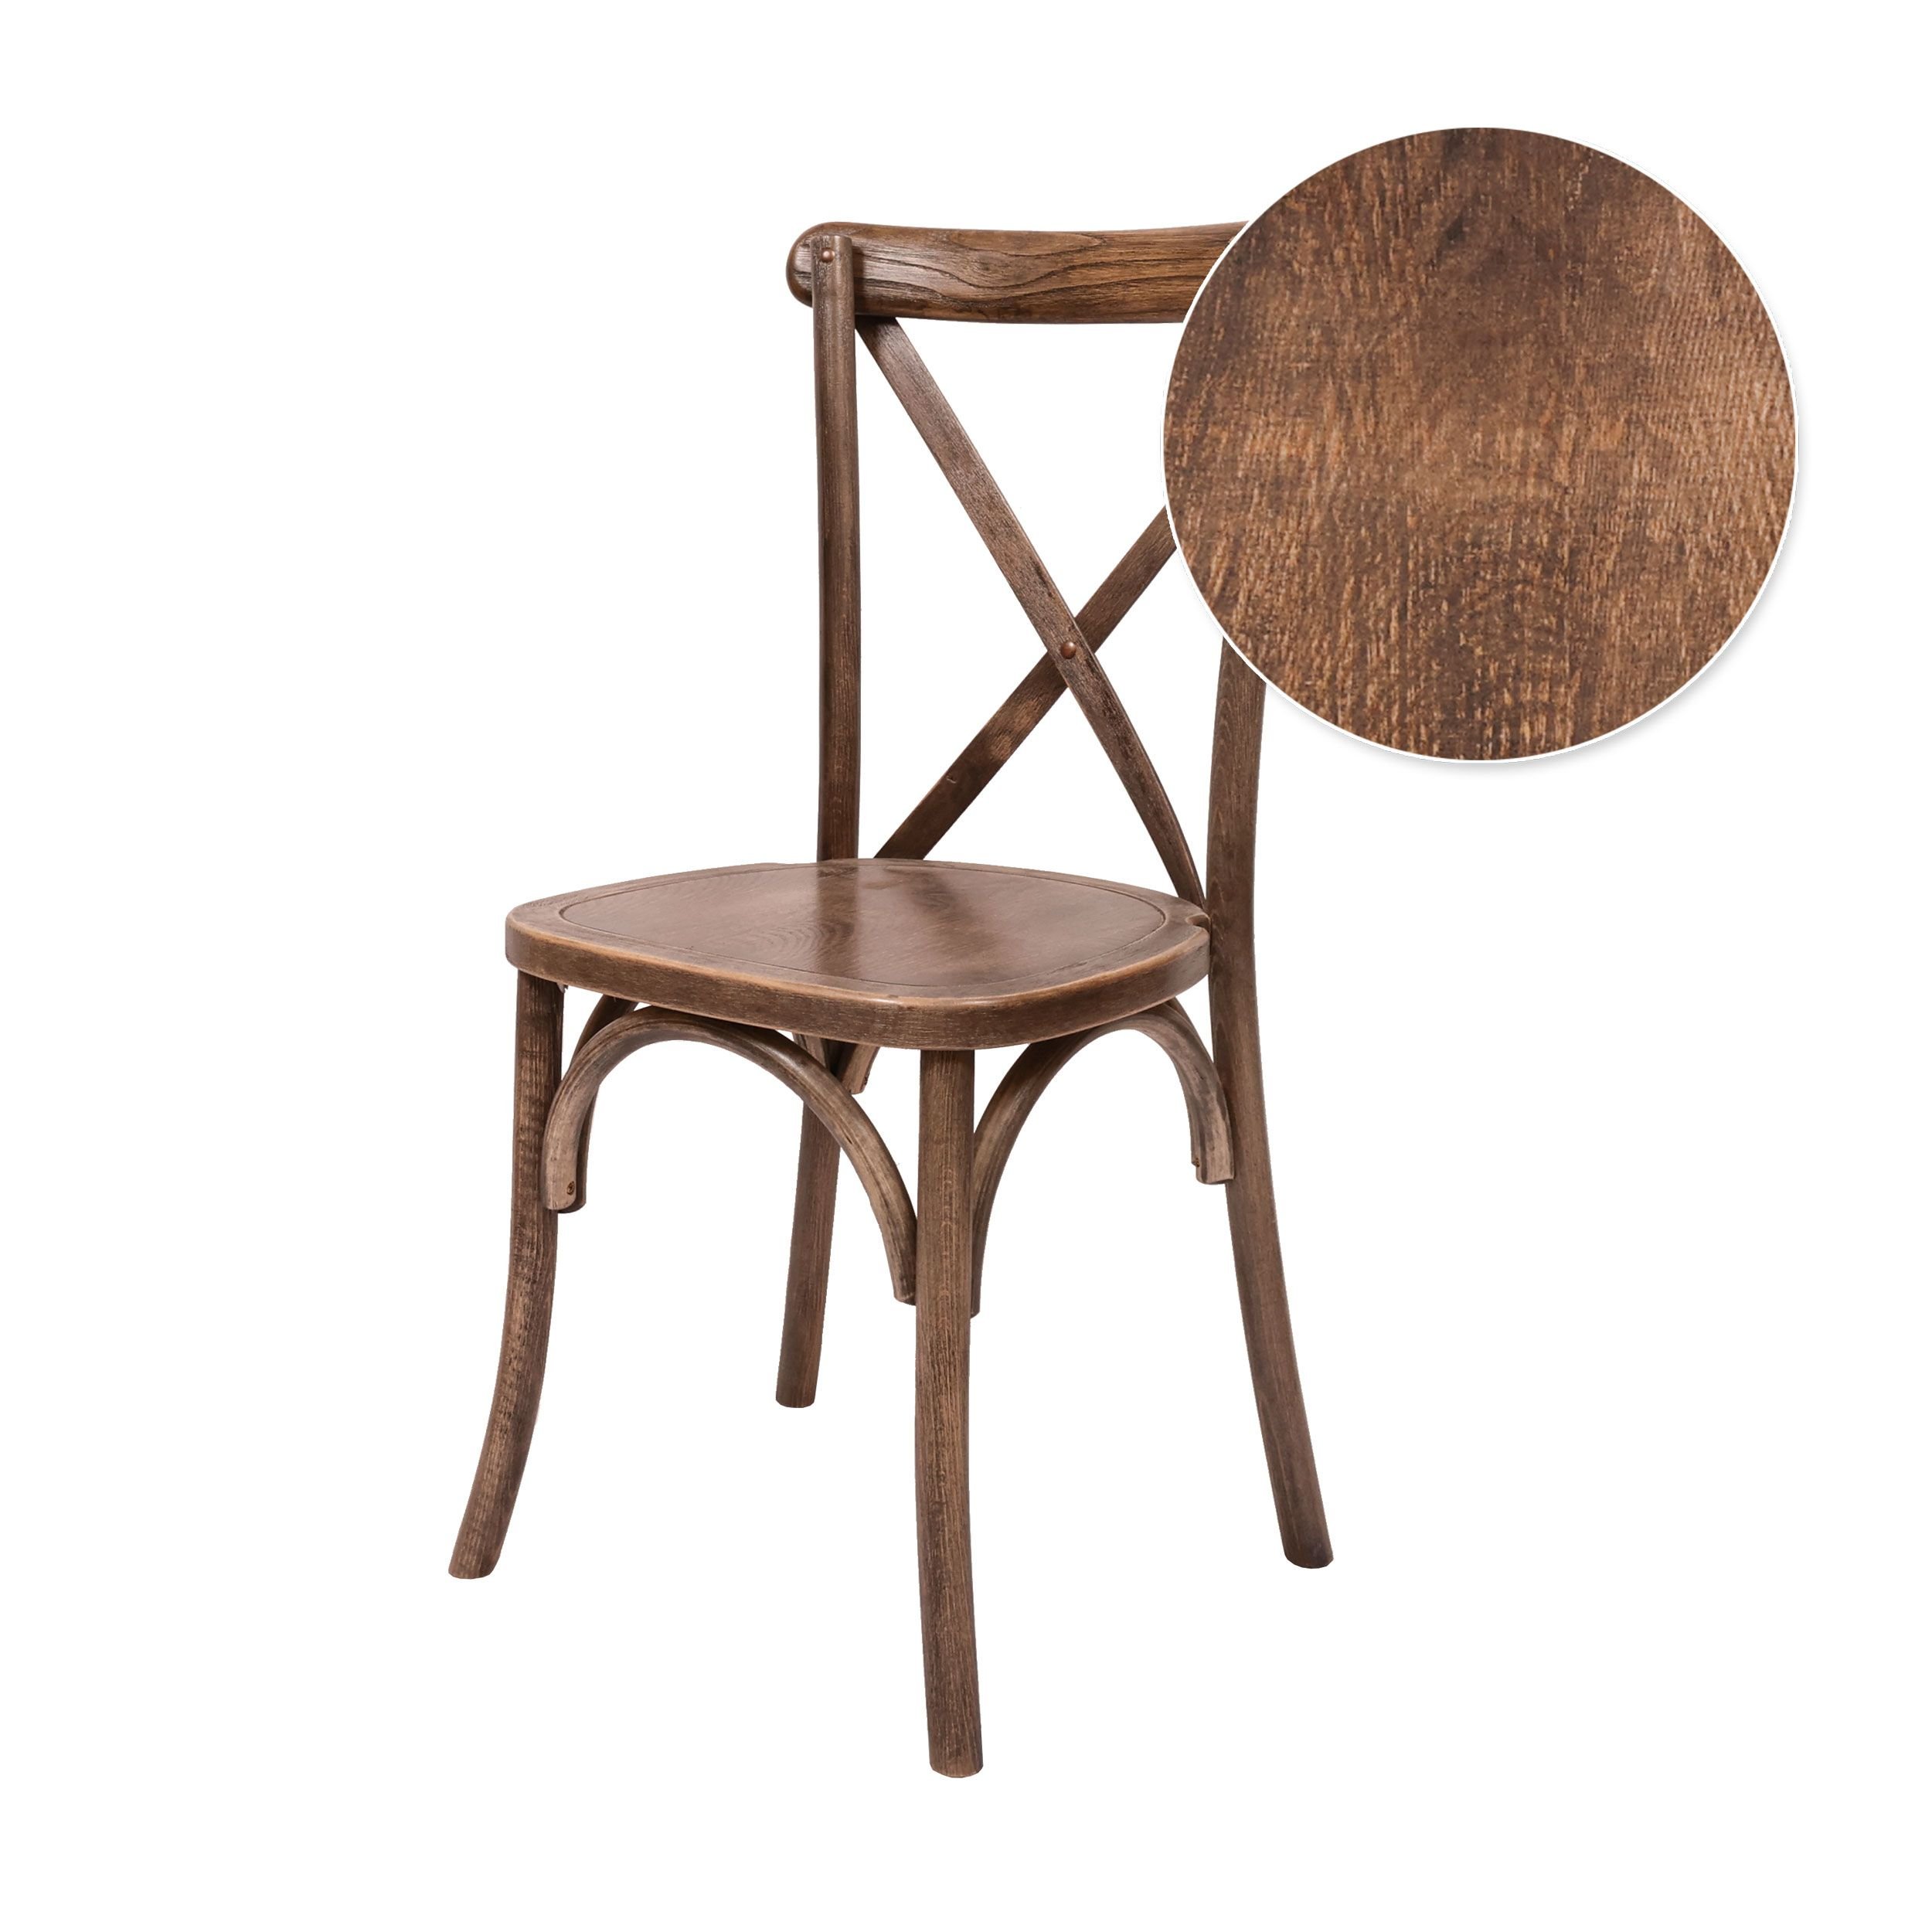 Chair Crossback Wood Fruitwood Z Series CXWF ZG T Chairs Swatch